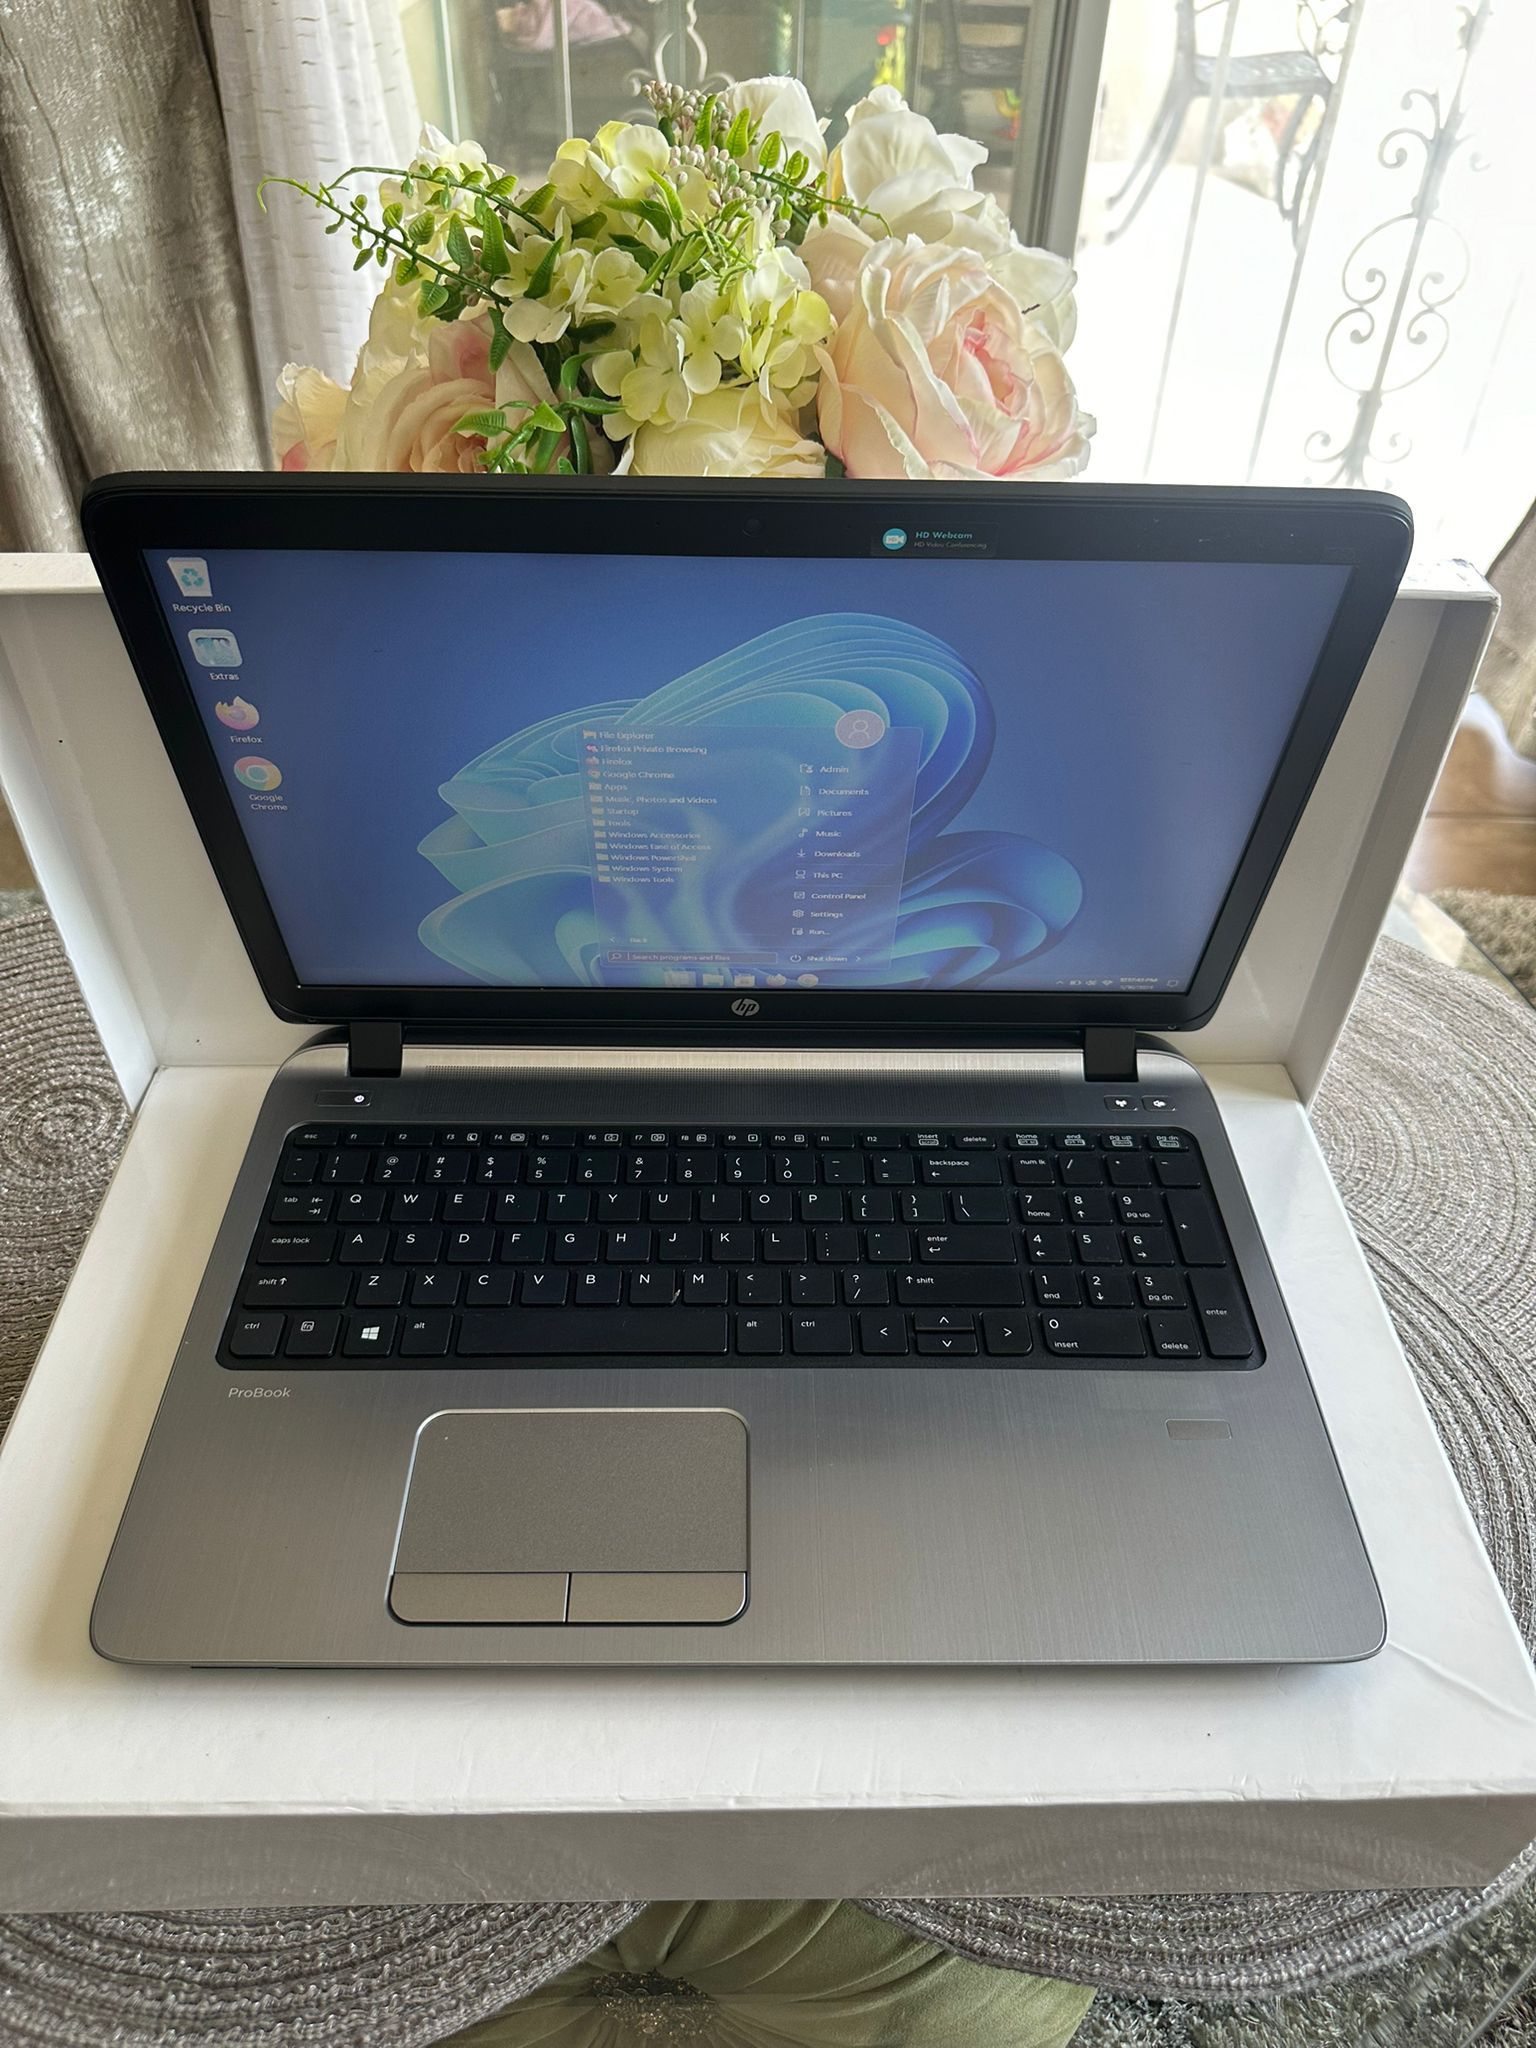 HP ProBook 450 15.6” Laptop Intel i5 8GB RAM 500GB HDD Windows 11 and Office - $119  See pictures for details. Charger included.   Please see our item